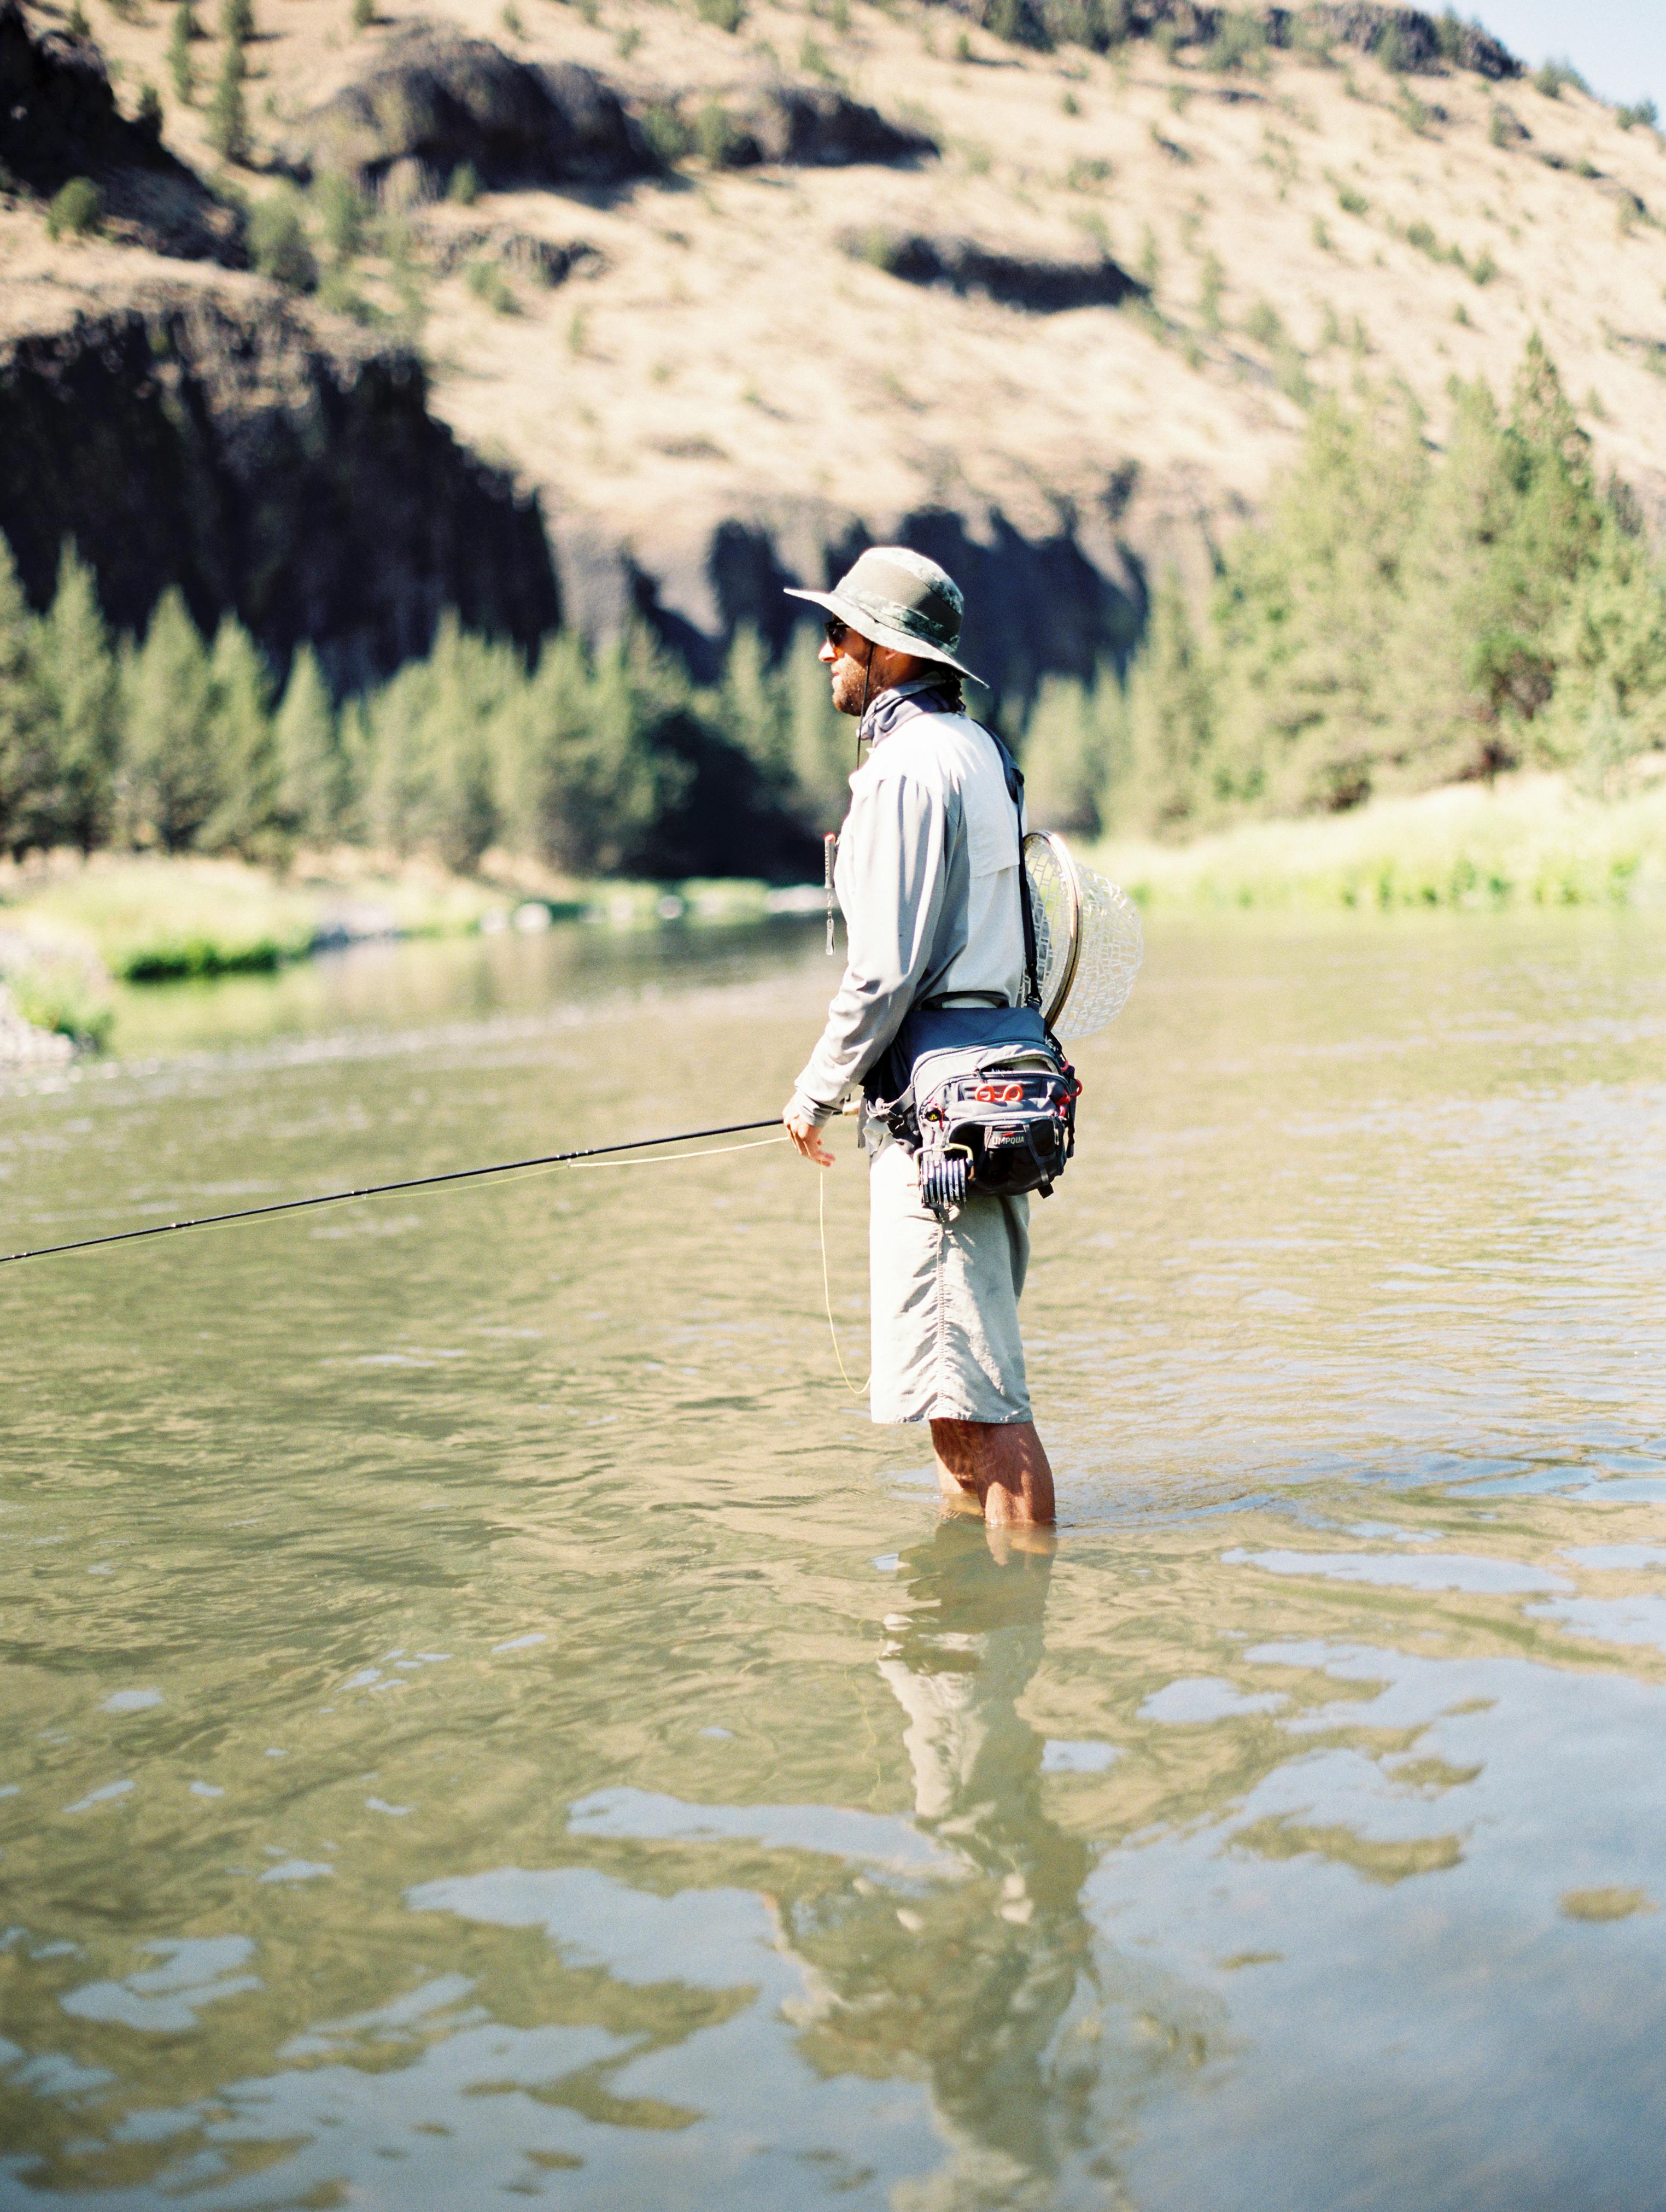  Fly Fishing: The Joy and Challenges of Fly Fishing| thumbnail